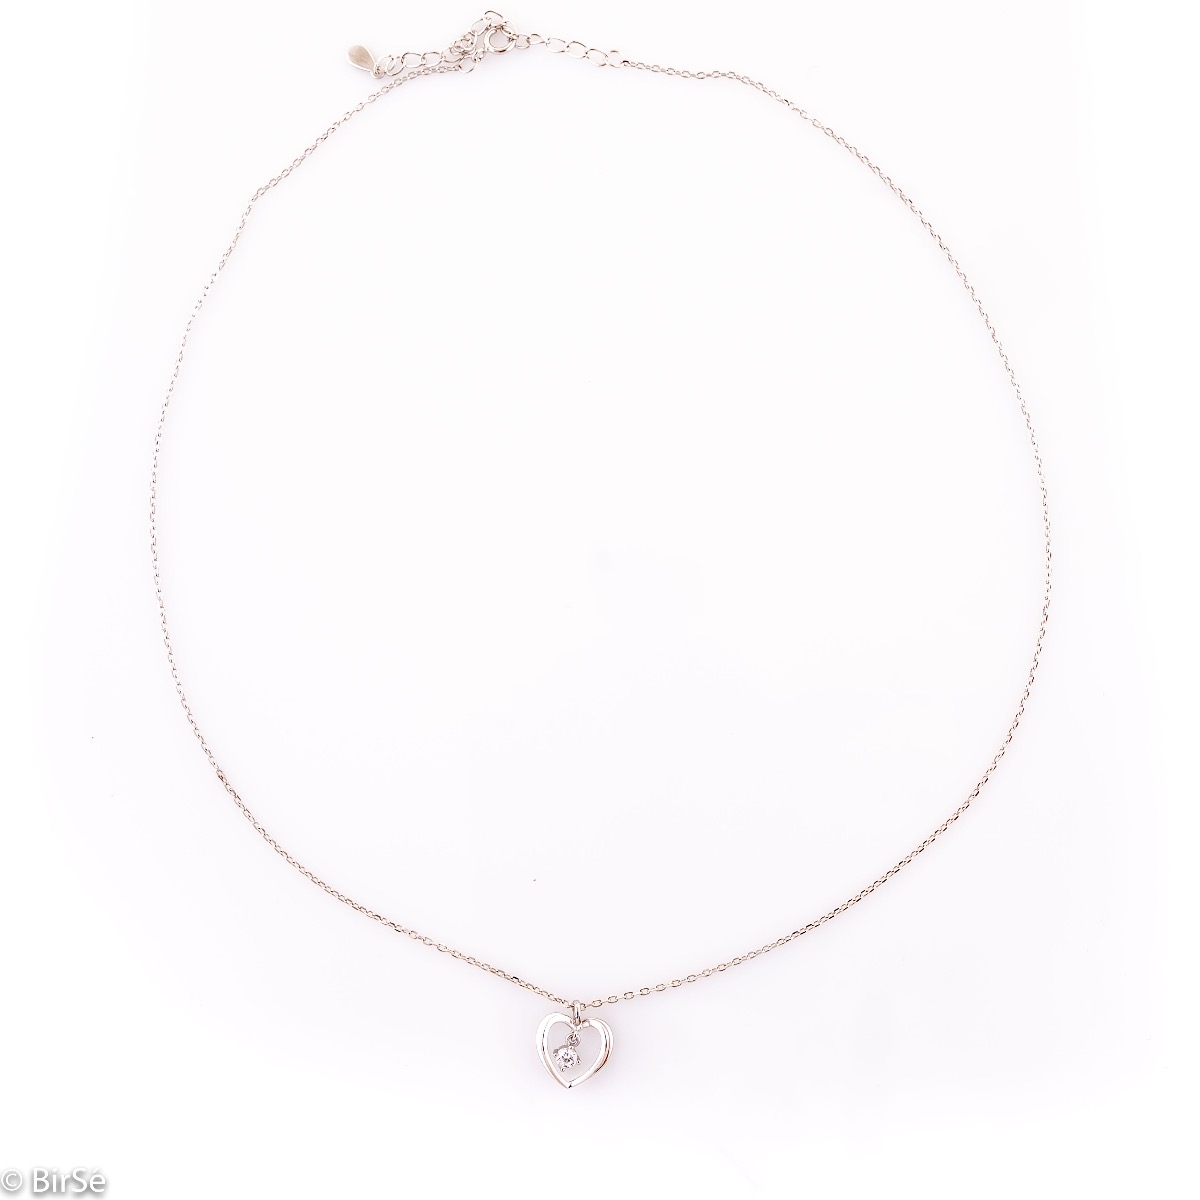 Silver Necklace - Heart